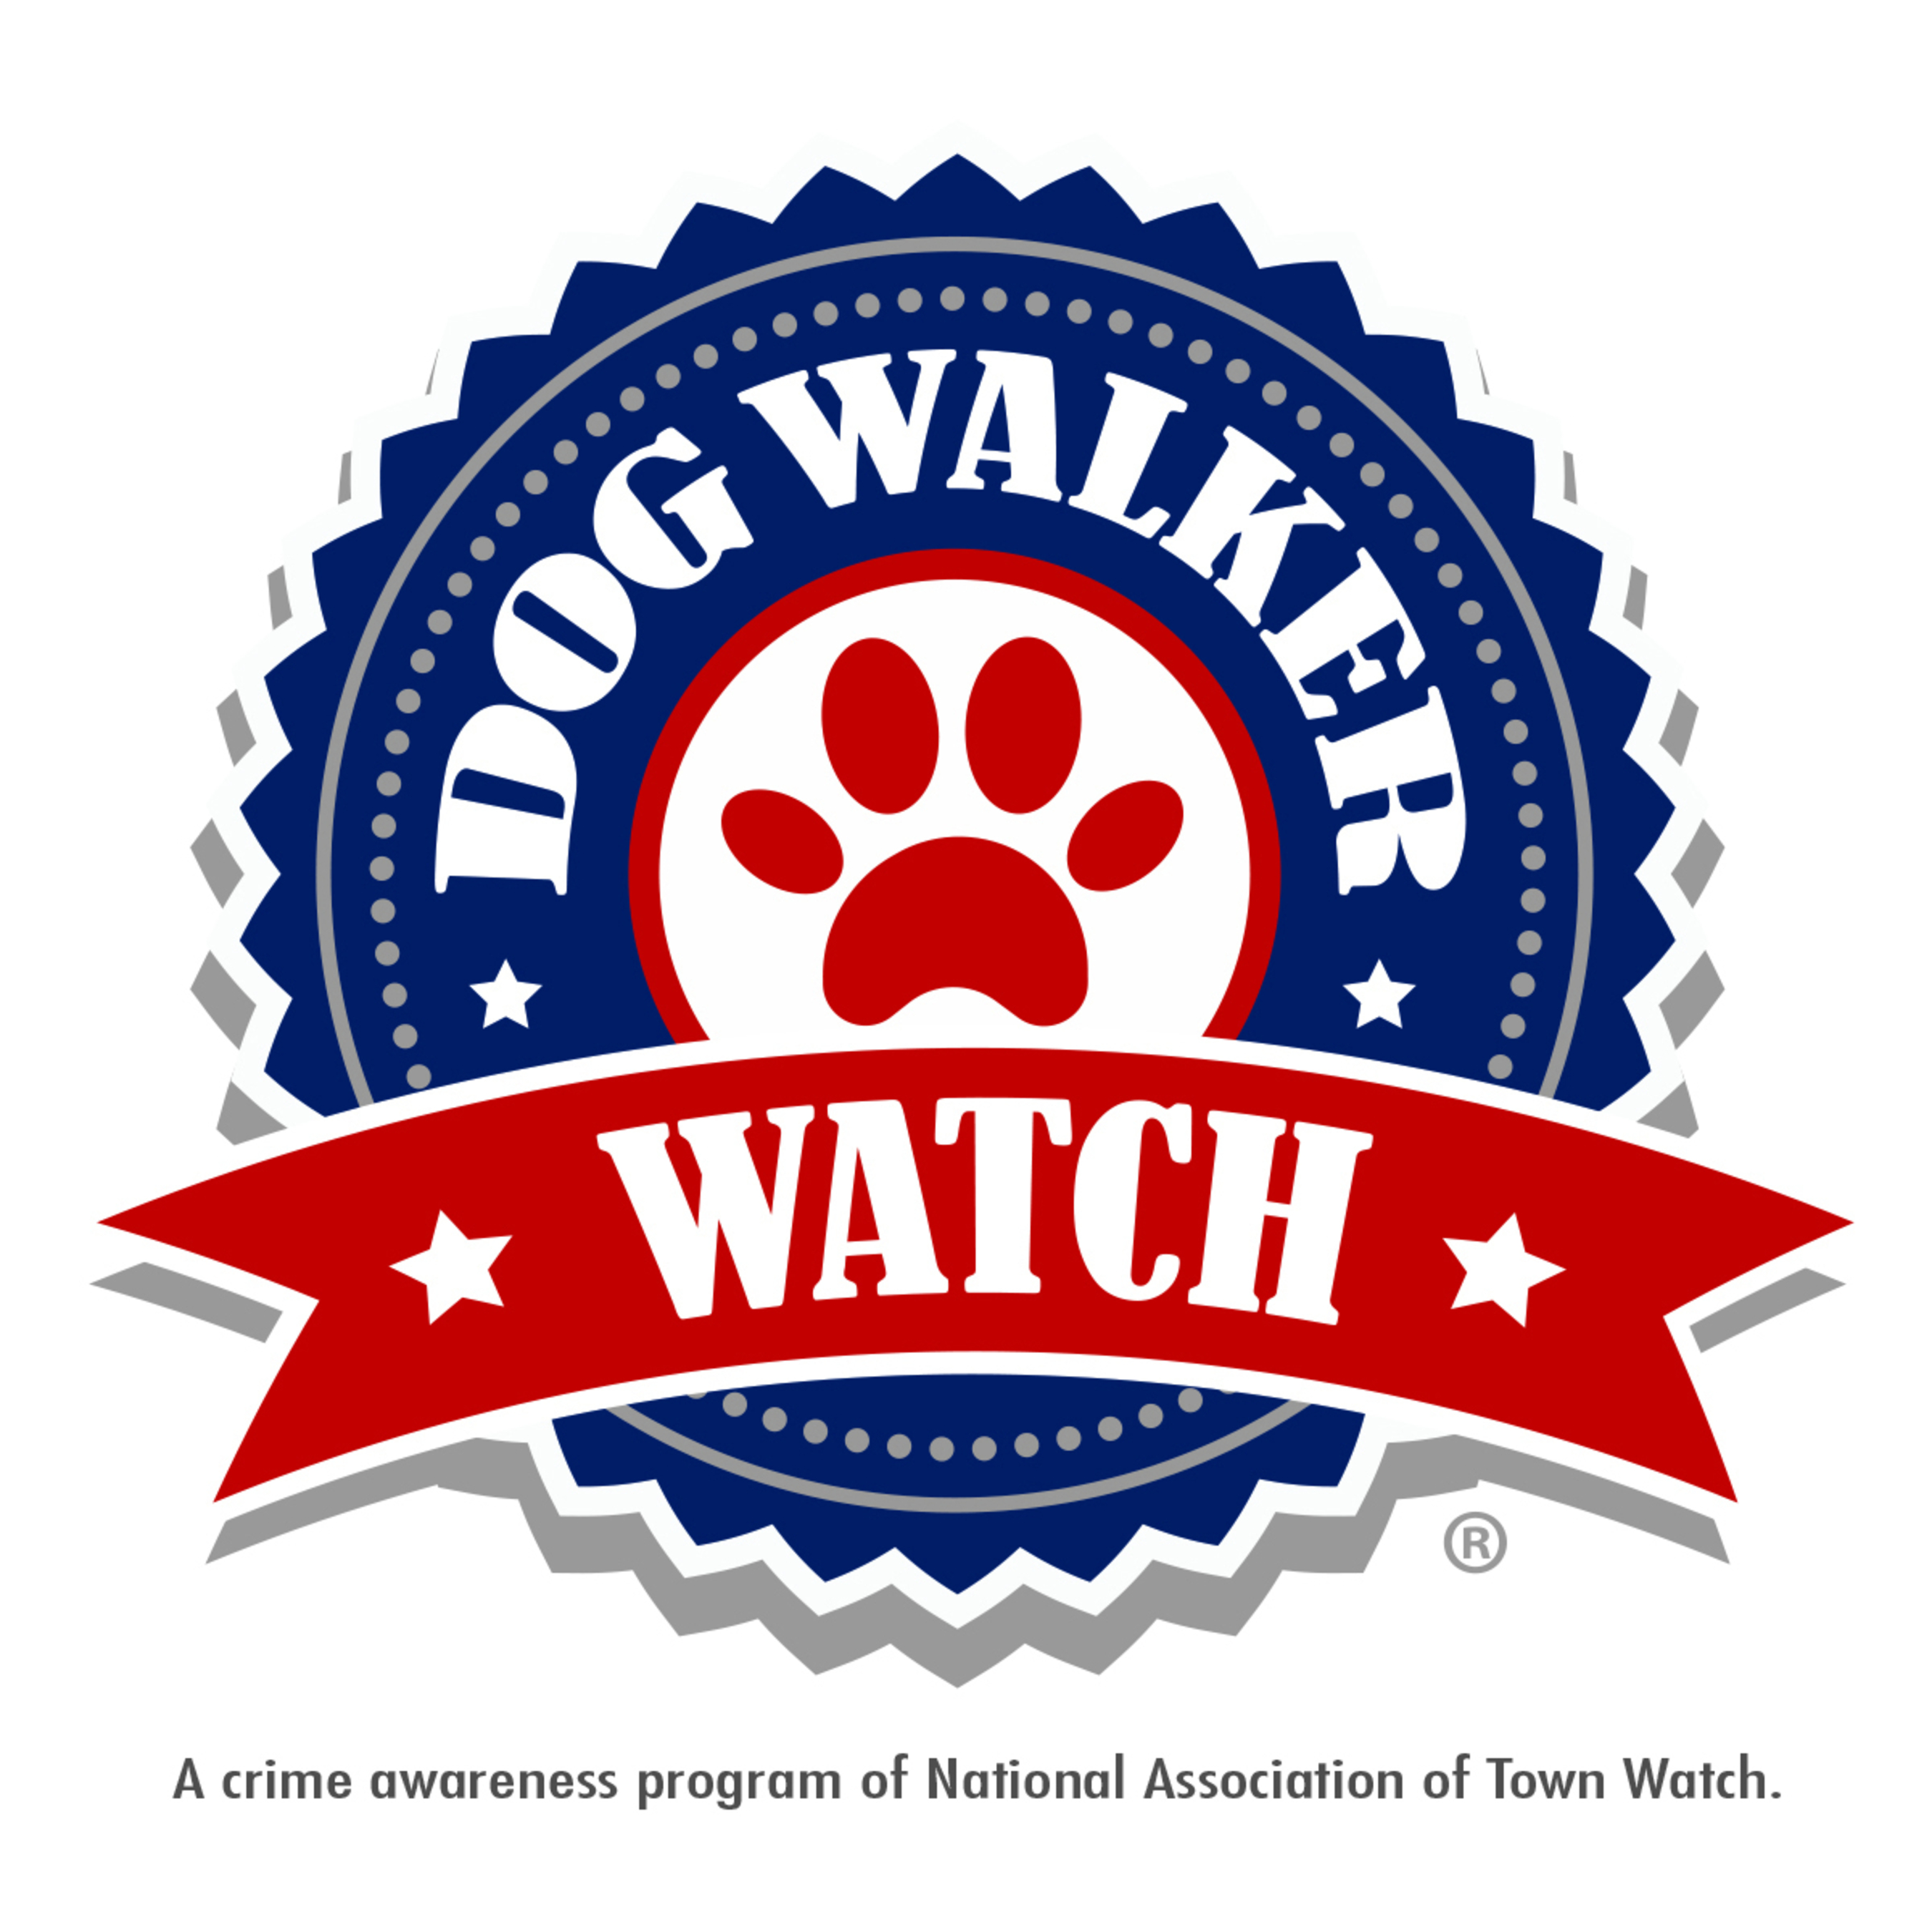 Dog Walker Watch - A new crime awareness program sponsored by the National Association of Town Watch. (PRNewsFoto/National Association of Town...) (PRNewsFoto/National Association of Town...)